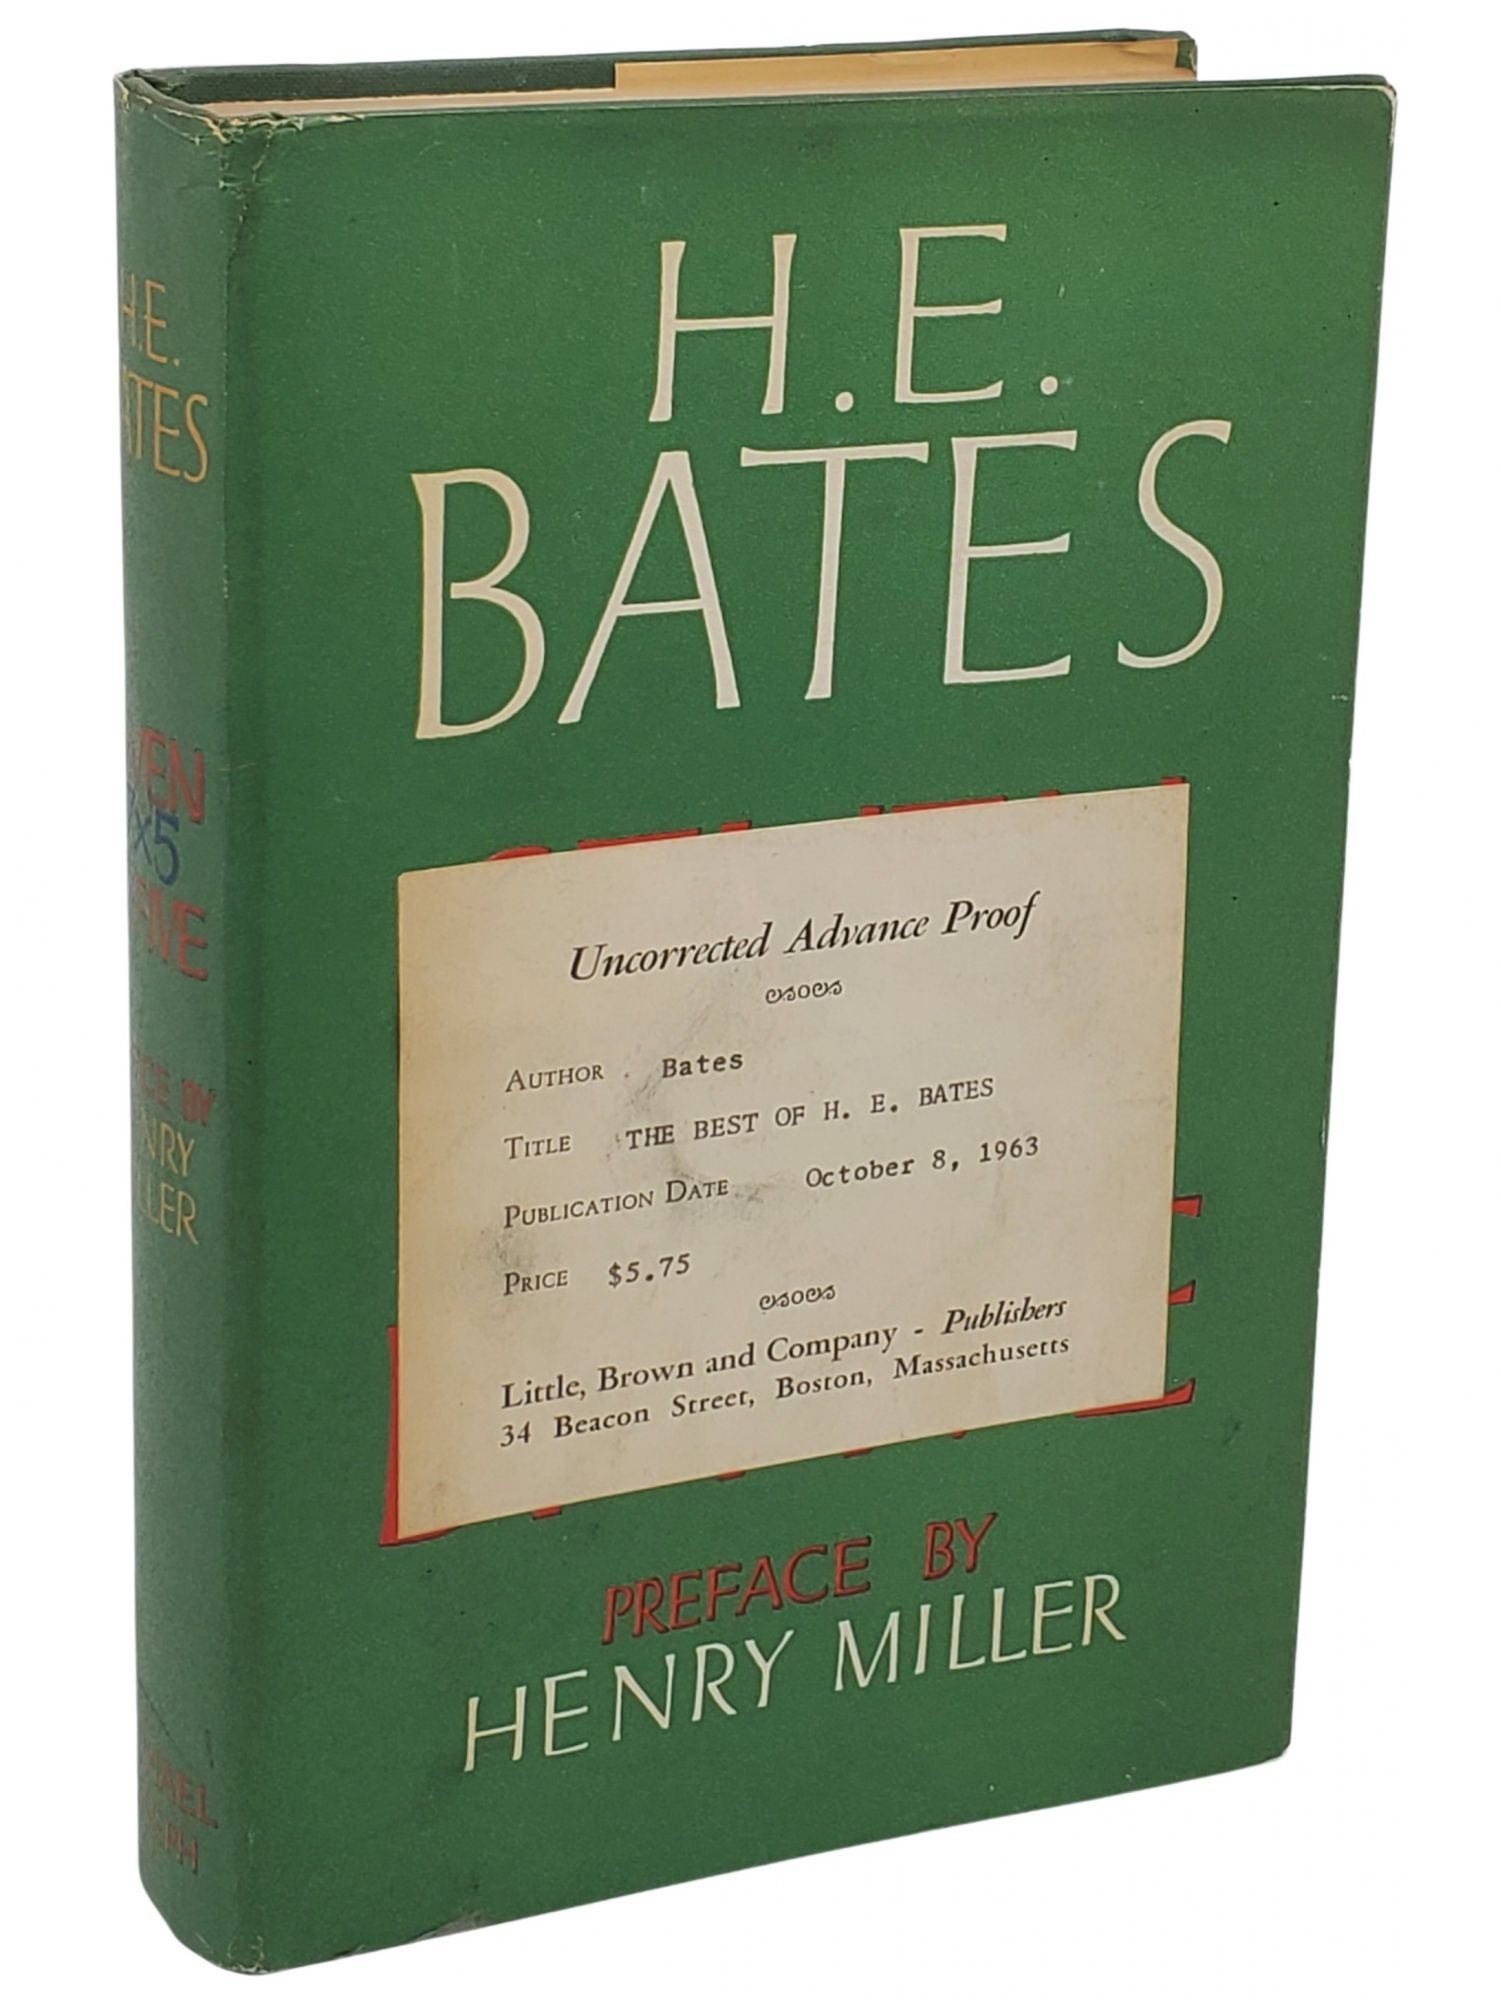 [Book #50642] THE BEST OF H. E. BATES - ADVANCE UNCORRECTED HARDCOVER PROOF. H. E. Bates, Henry Miller.